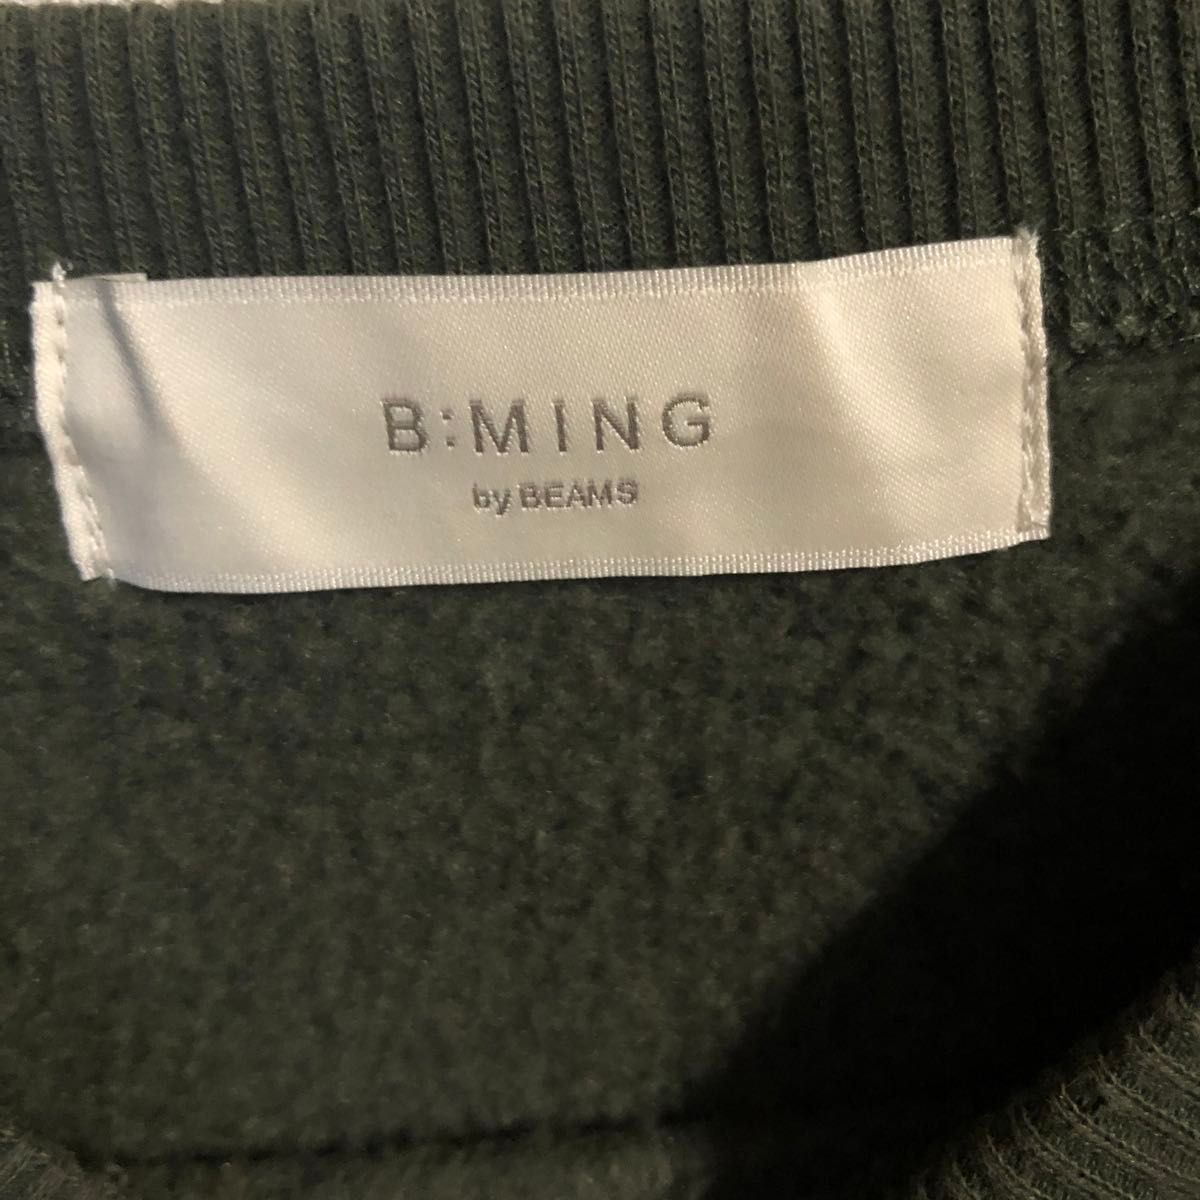 B：MING by BEAMS ビームス　セットアップ